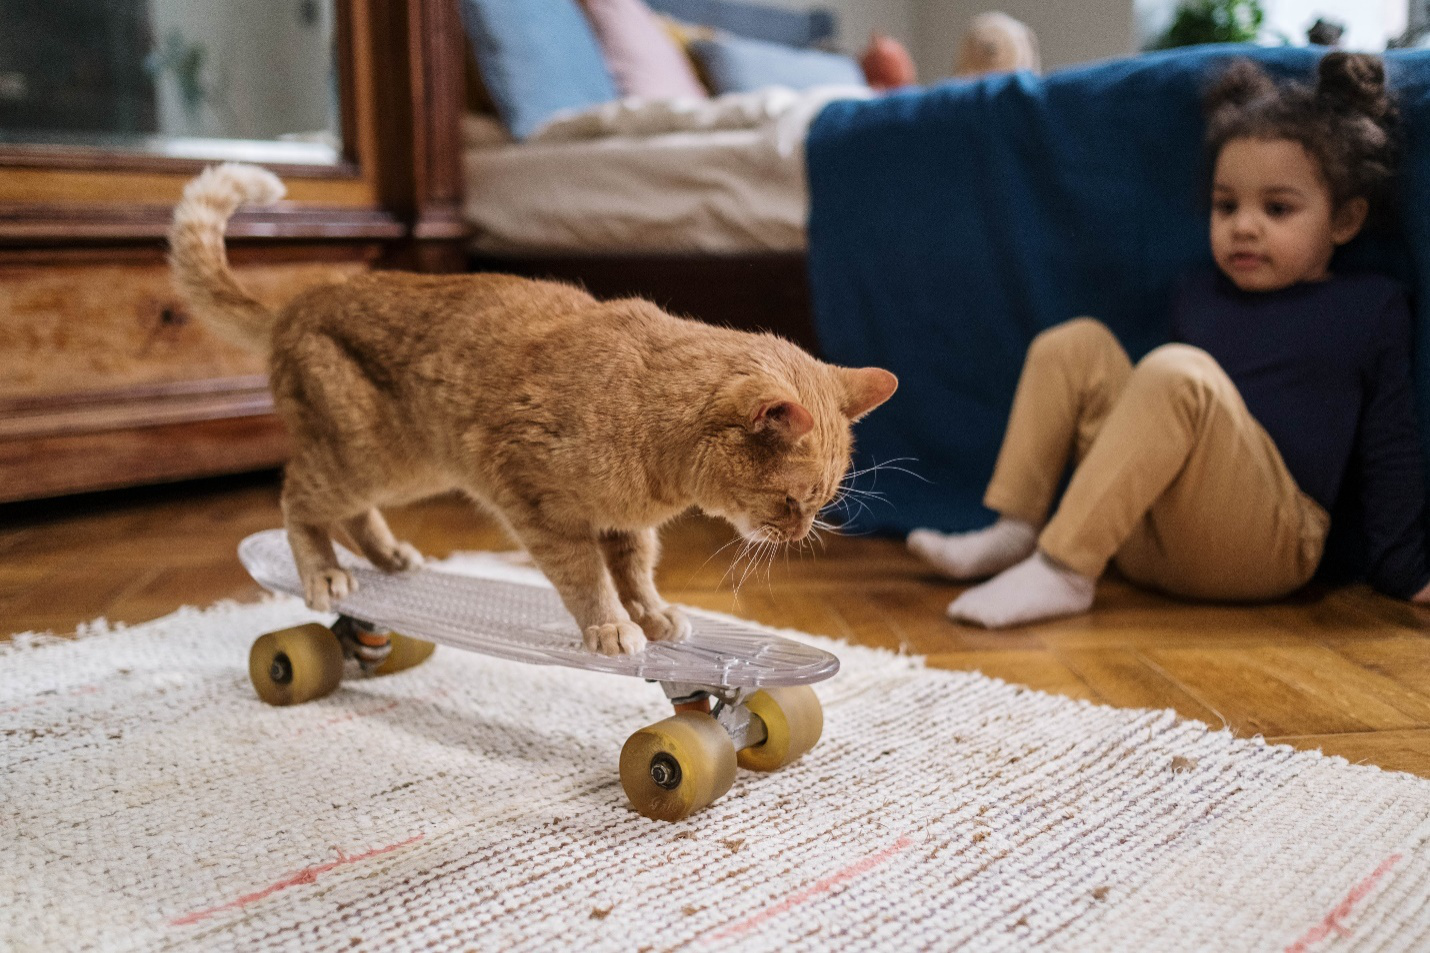  A child playing with a cat on a skateboard.